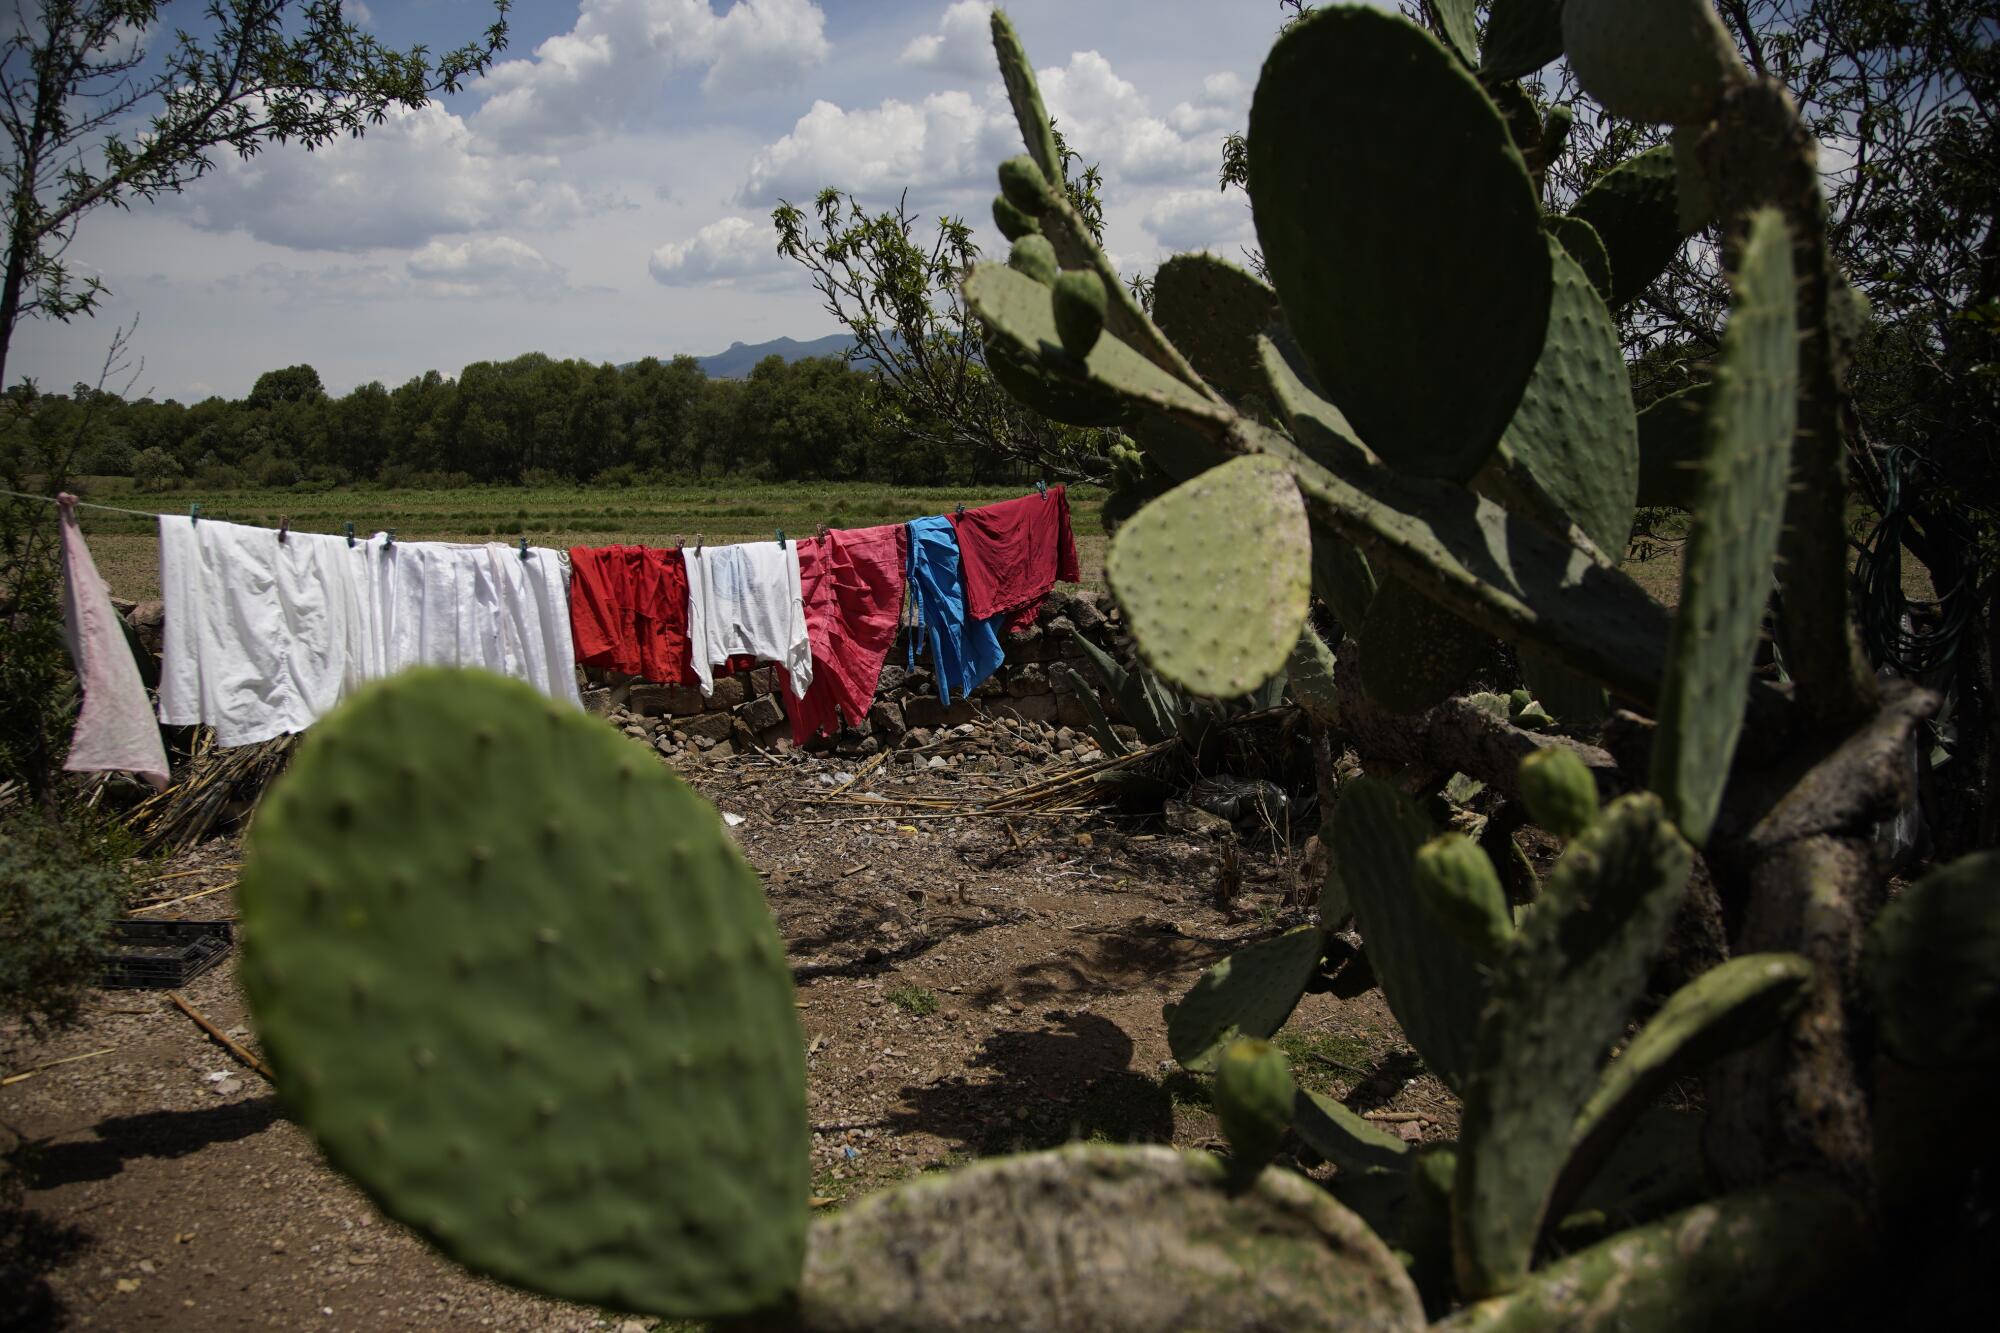 Clothes hung out to dry in the front yard of the family home at El Rincón de San Ildefonso.